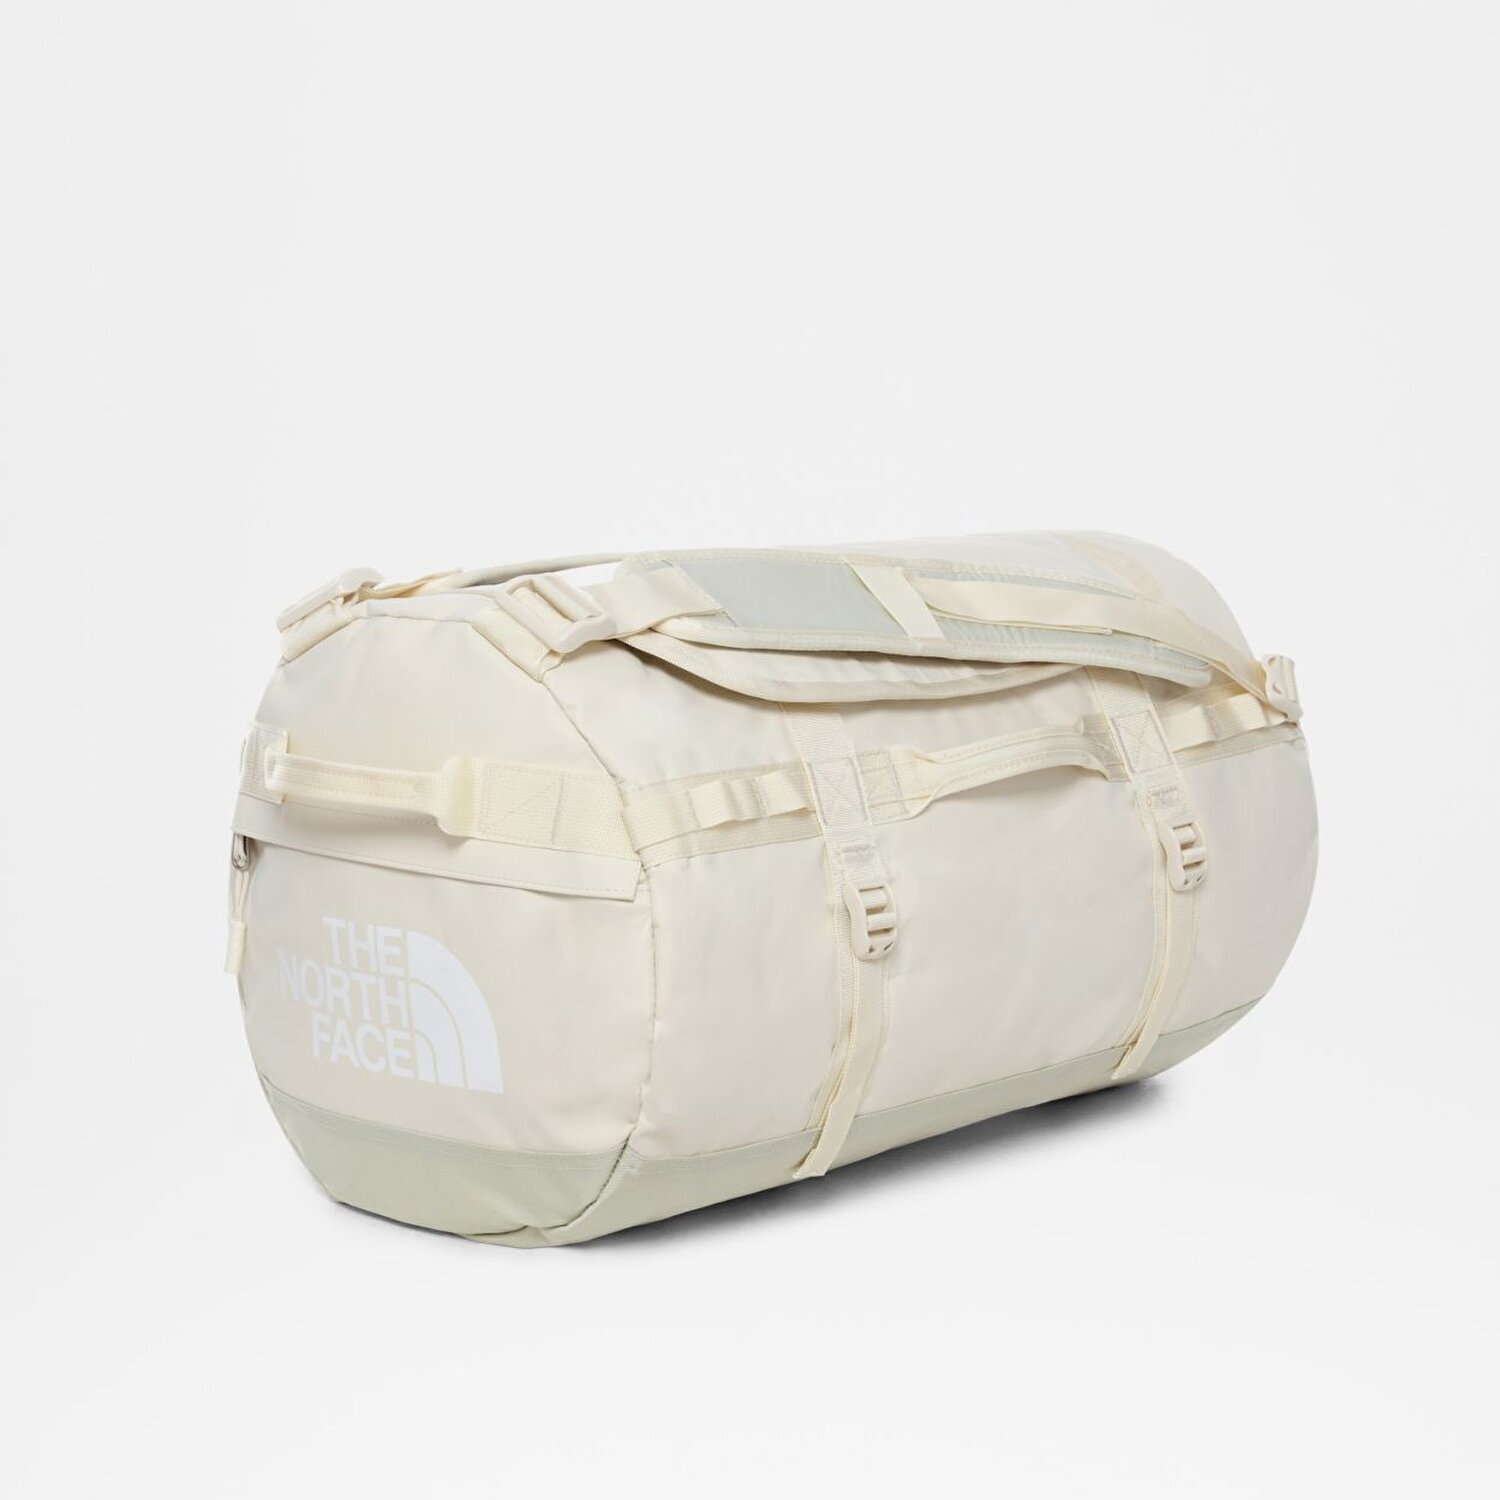 The North Face BASE CAMP DUFFEL - SMALL. 1